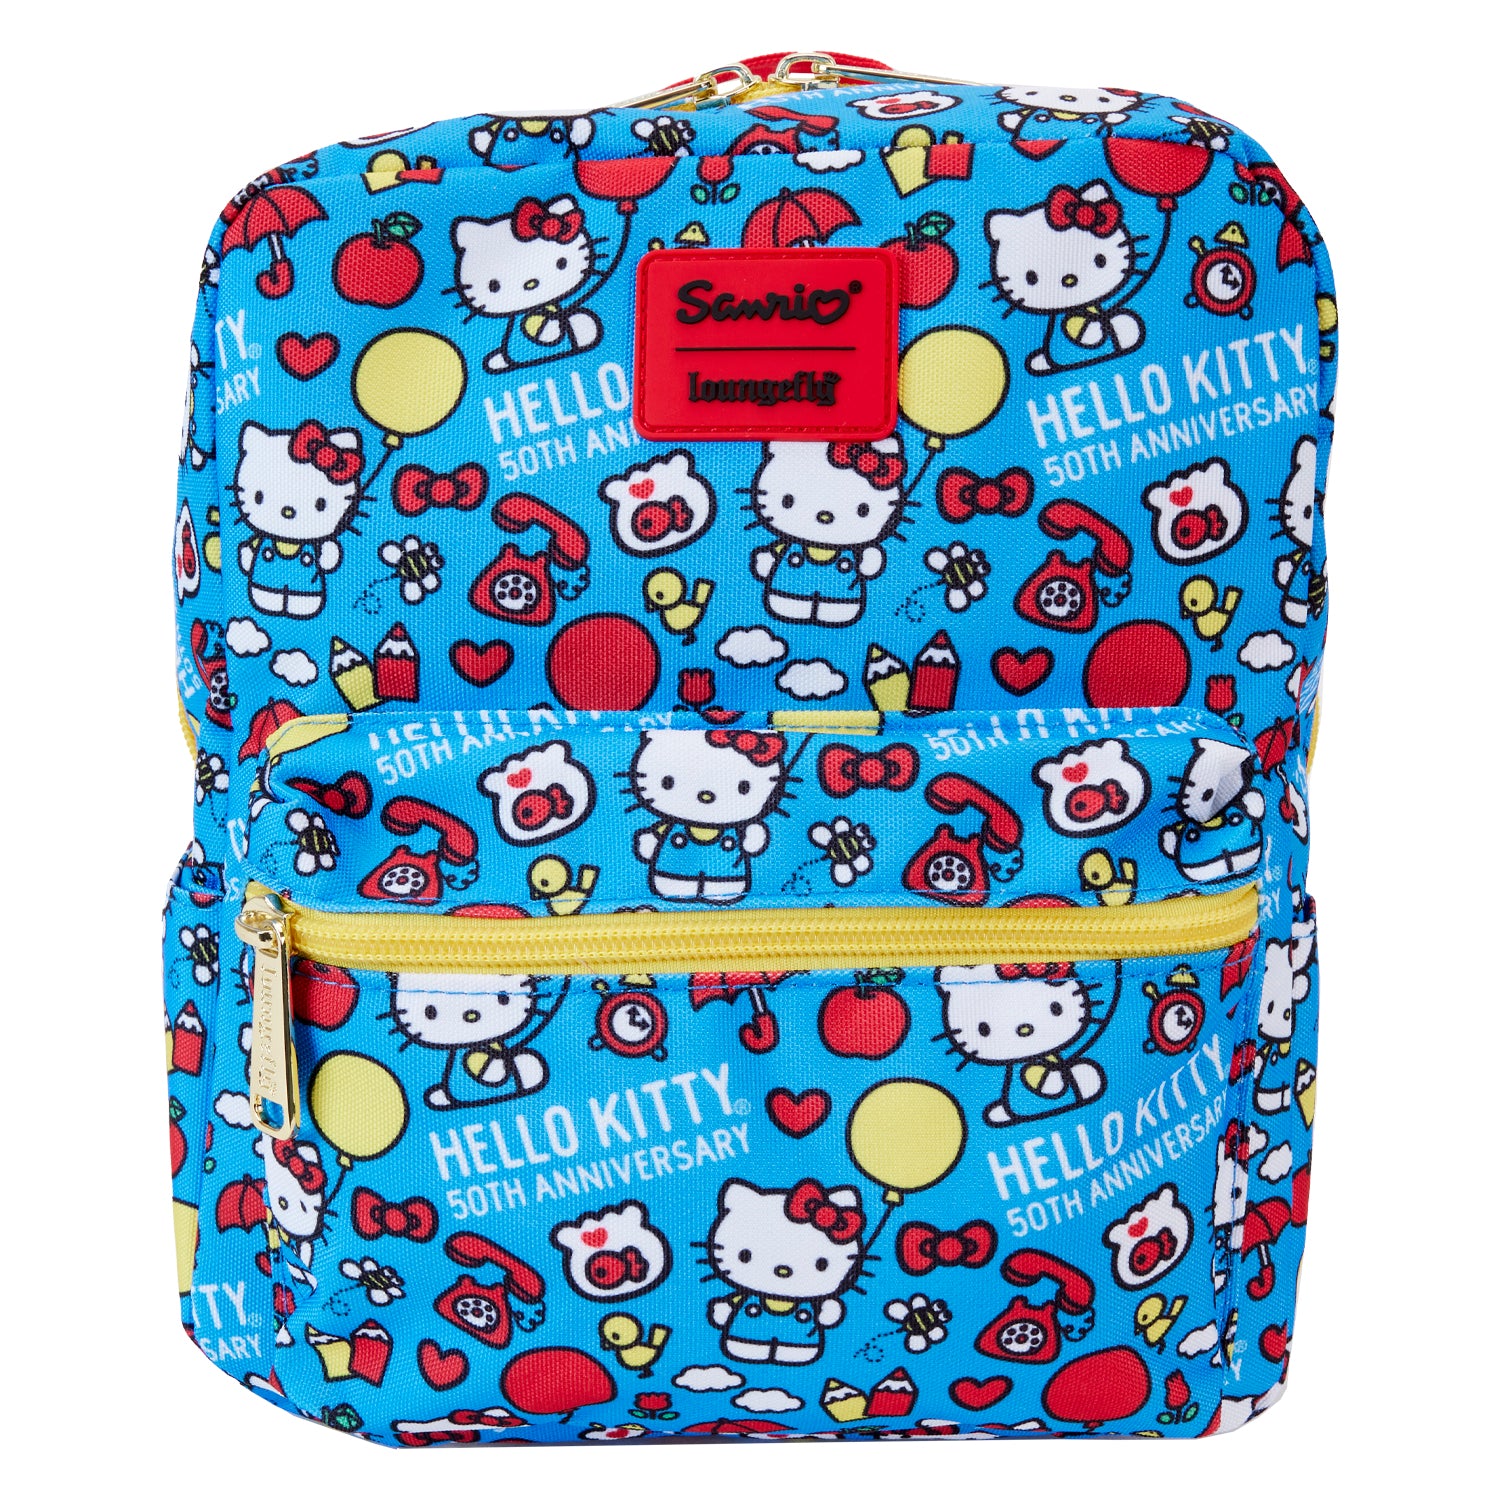 Hello Kitty x Loungefly 50th Anniversary Classic Mini Backpack Bags Loungefly   